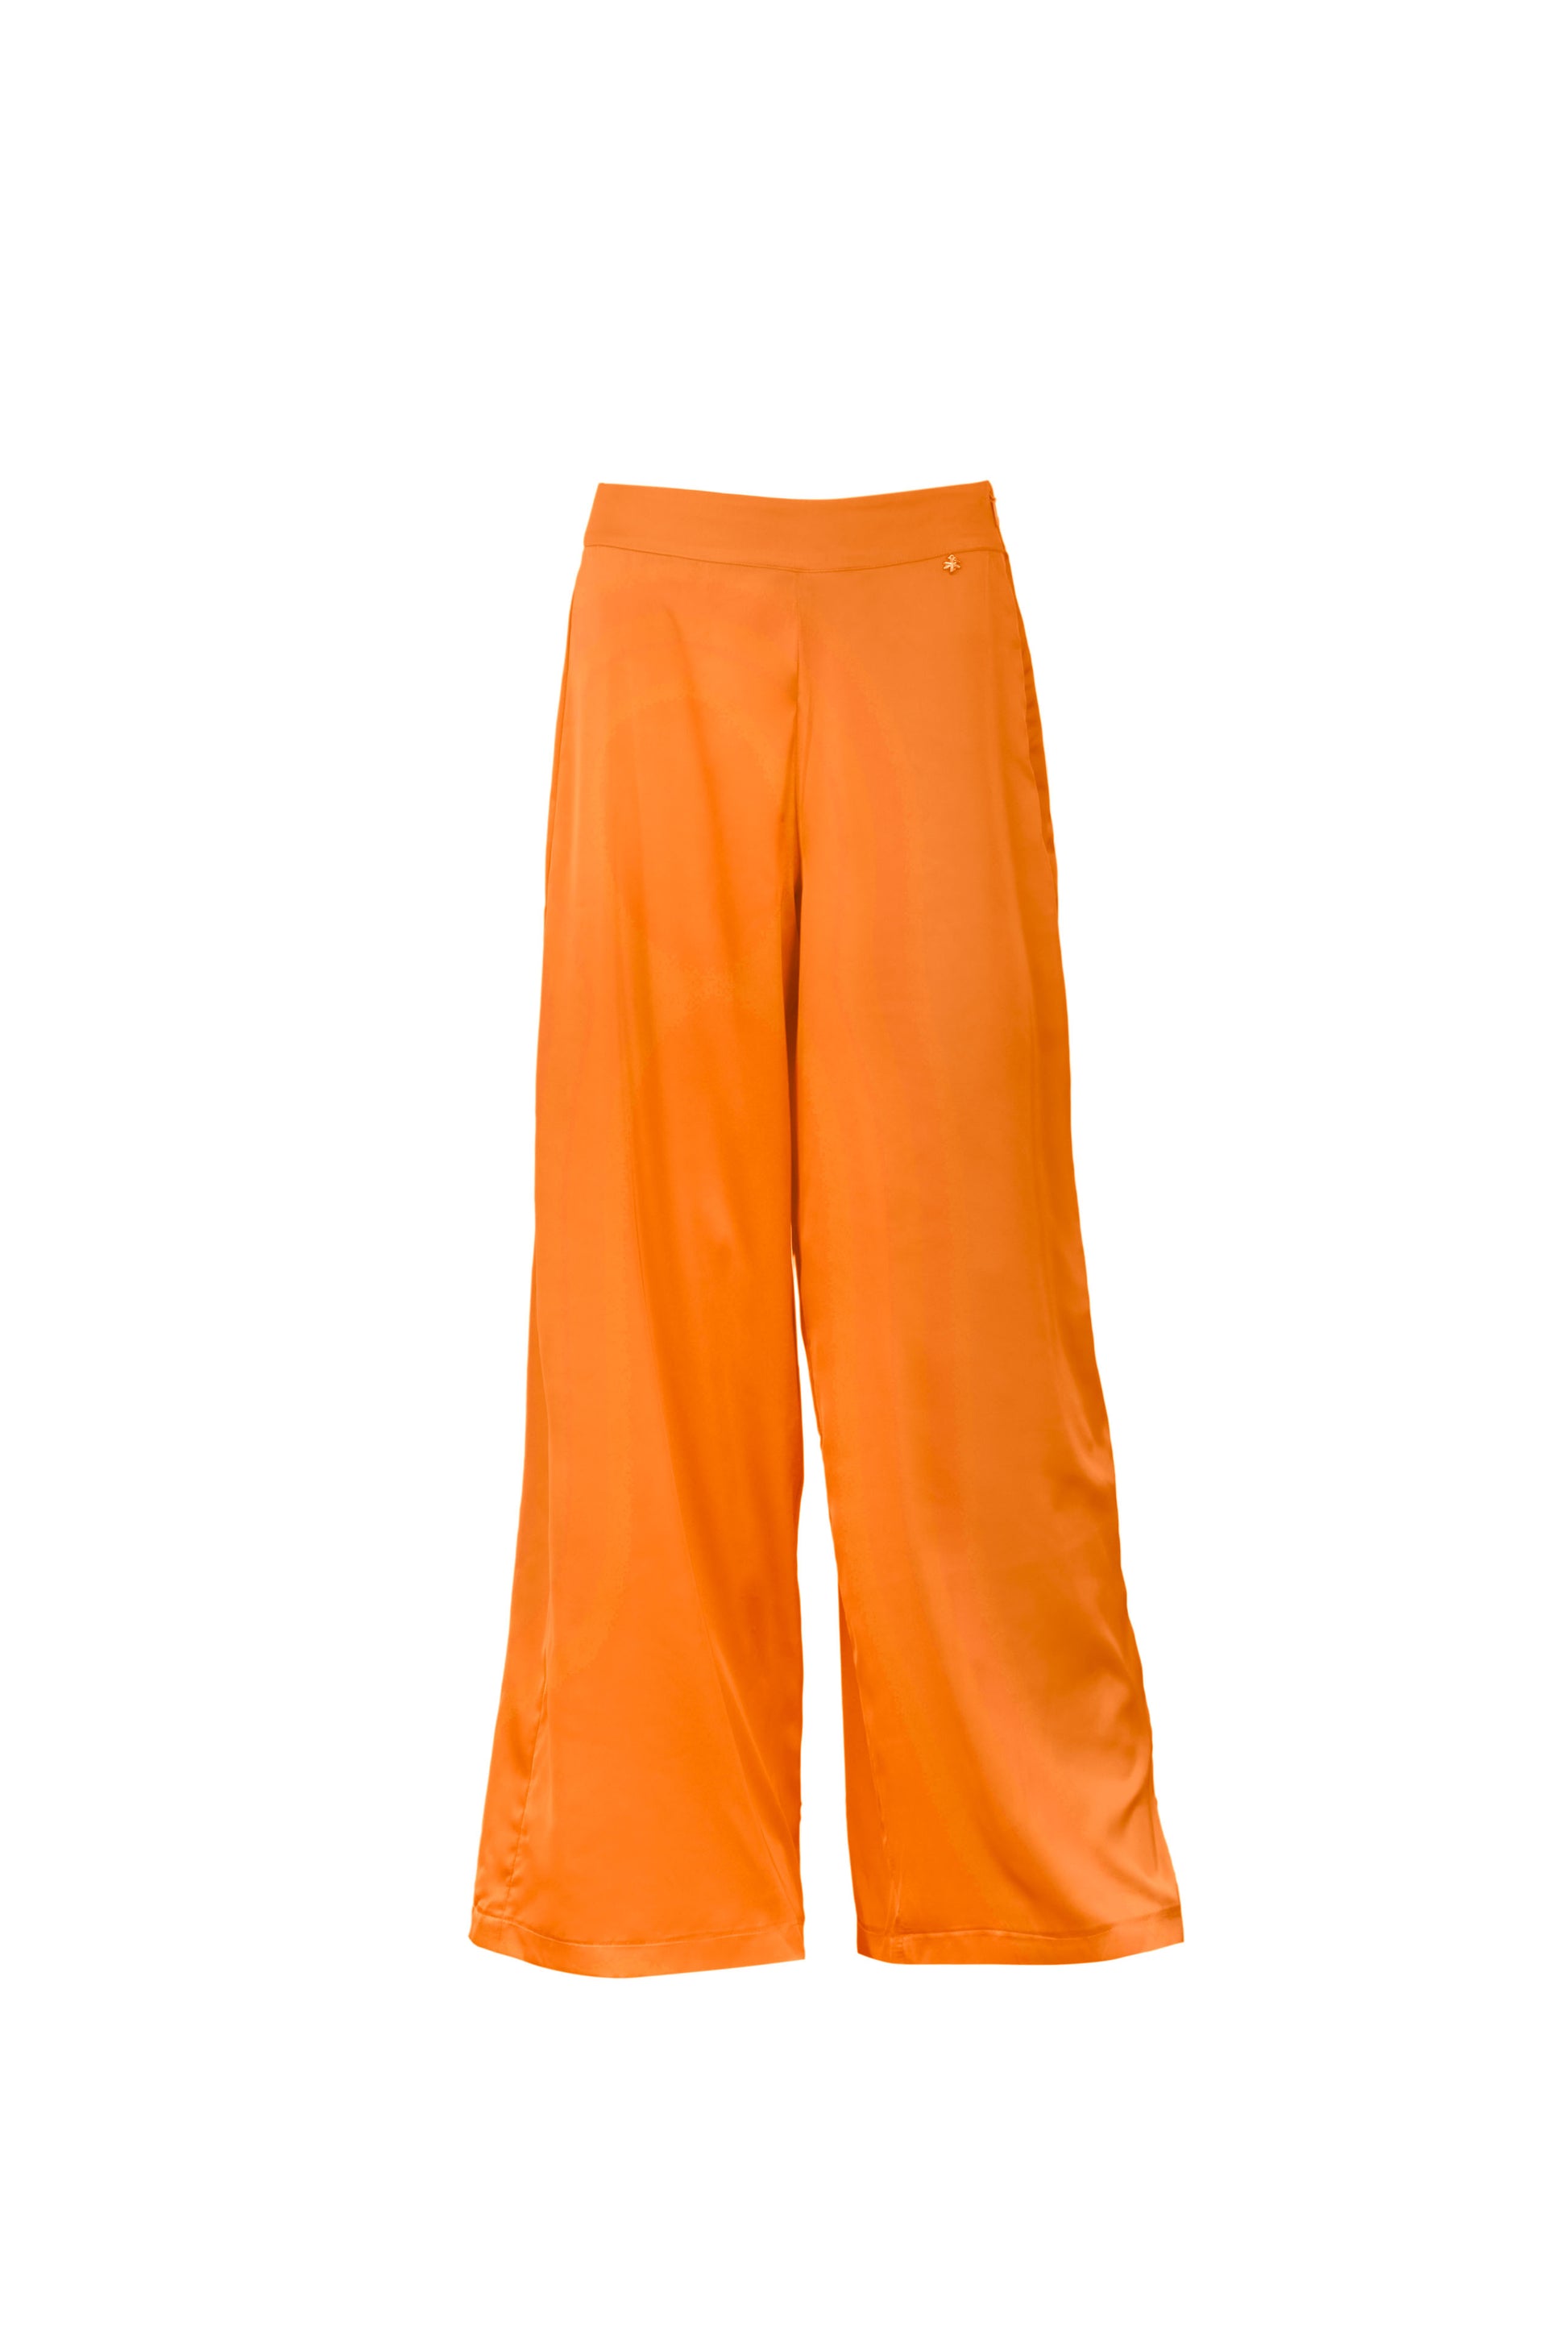 silk pants,firefly charm, side zipper,vibrant silk collection,mix and match,edgy style,luxury fashion,comfort and style,quality design,durable, orange pants